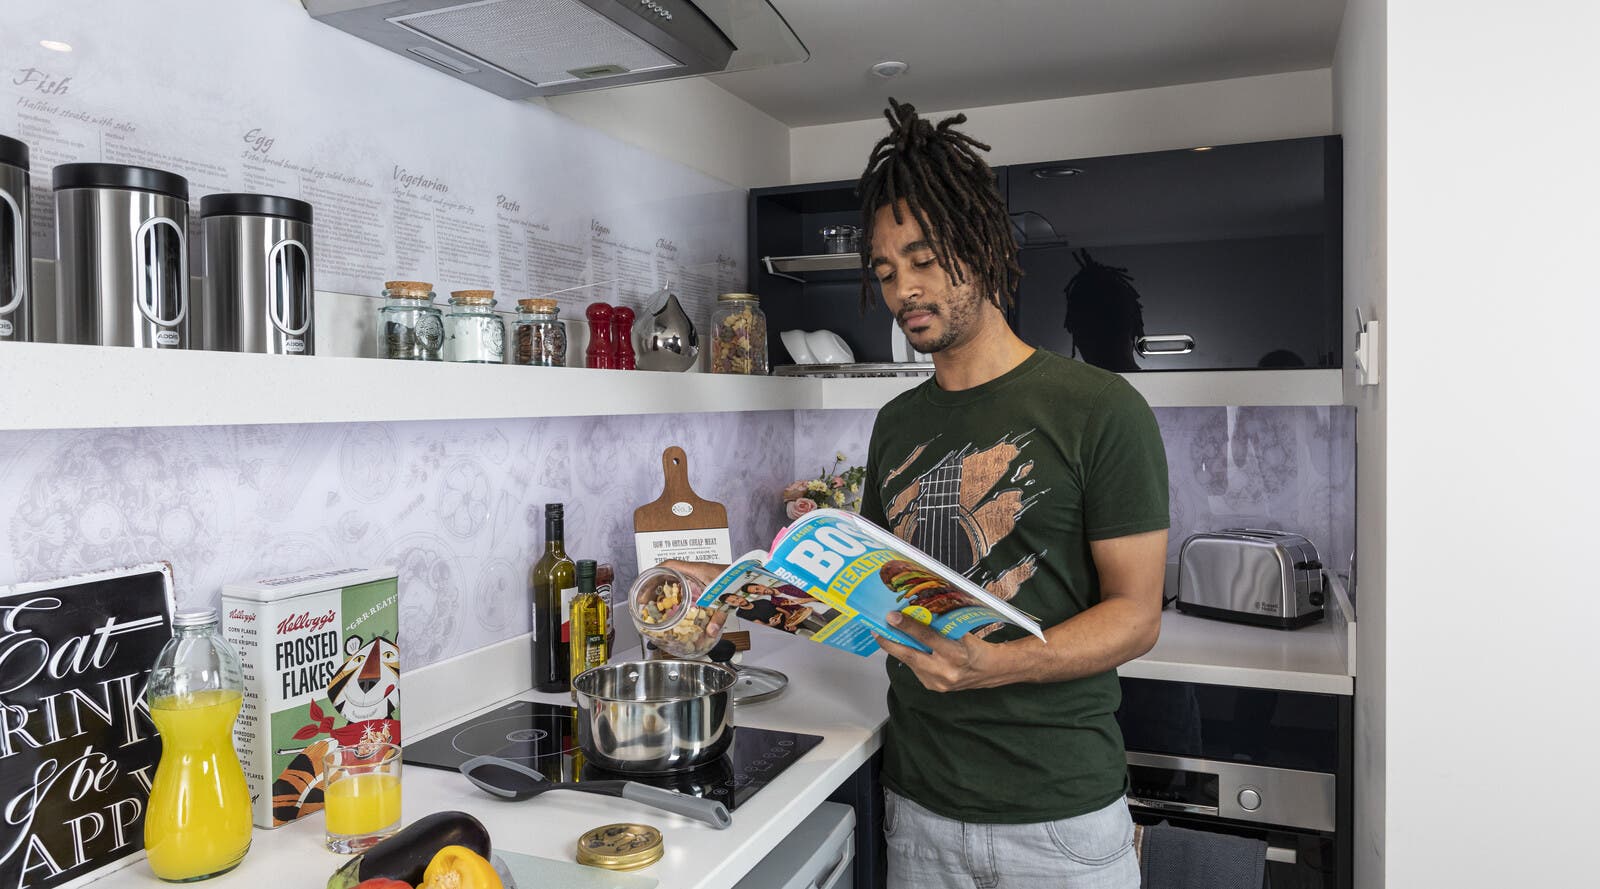 Student reading a magazine in accommodation kitchen